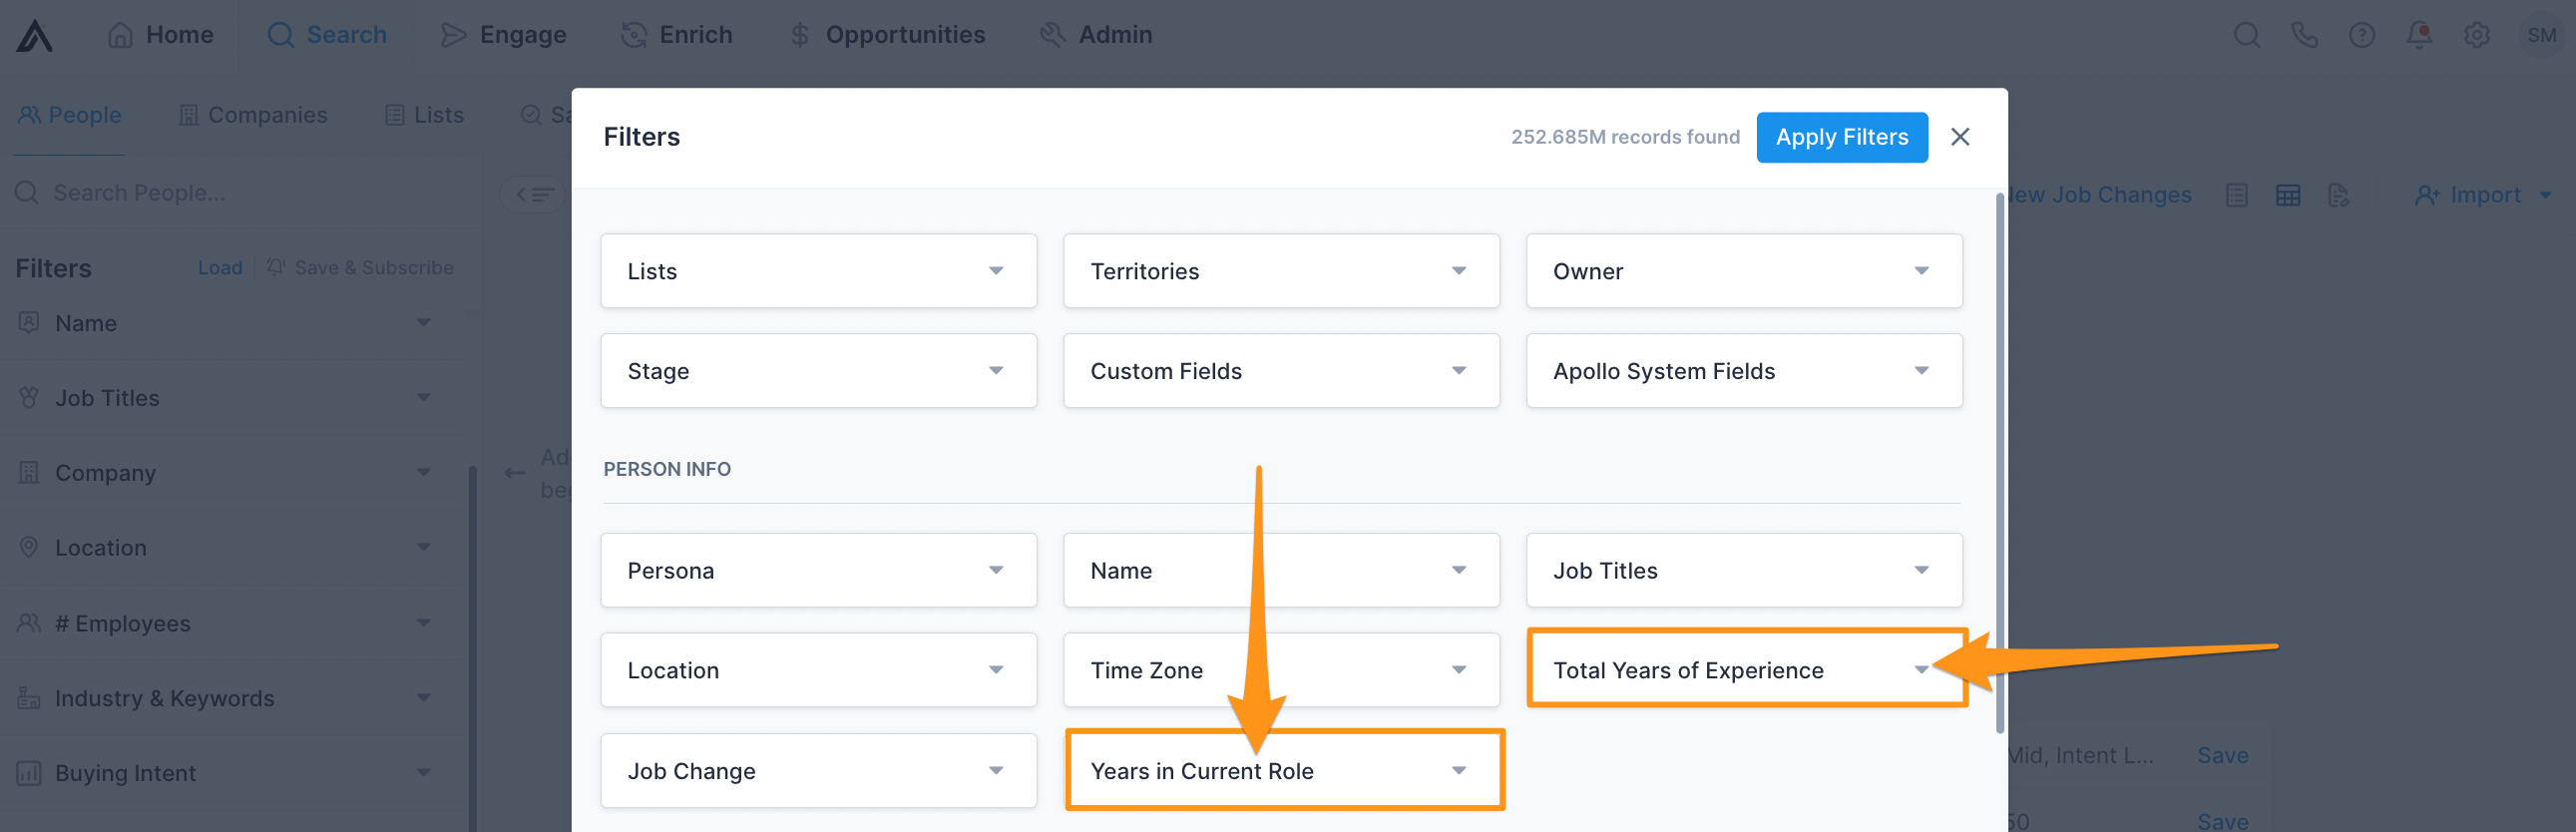 New Recruitment Filters in More Filters Modal